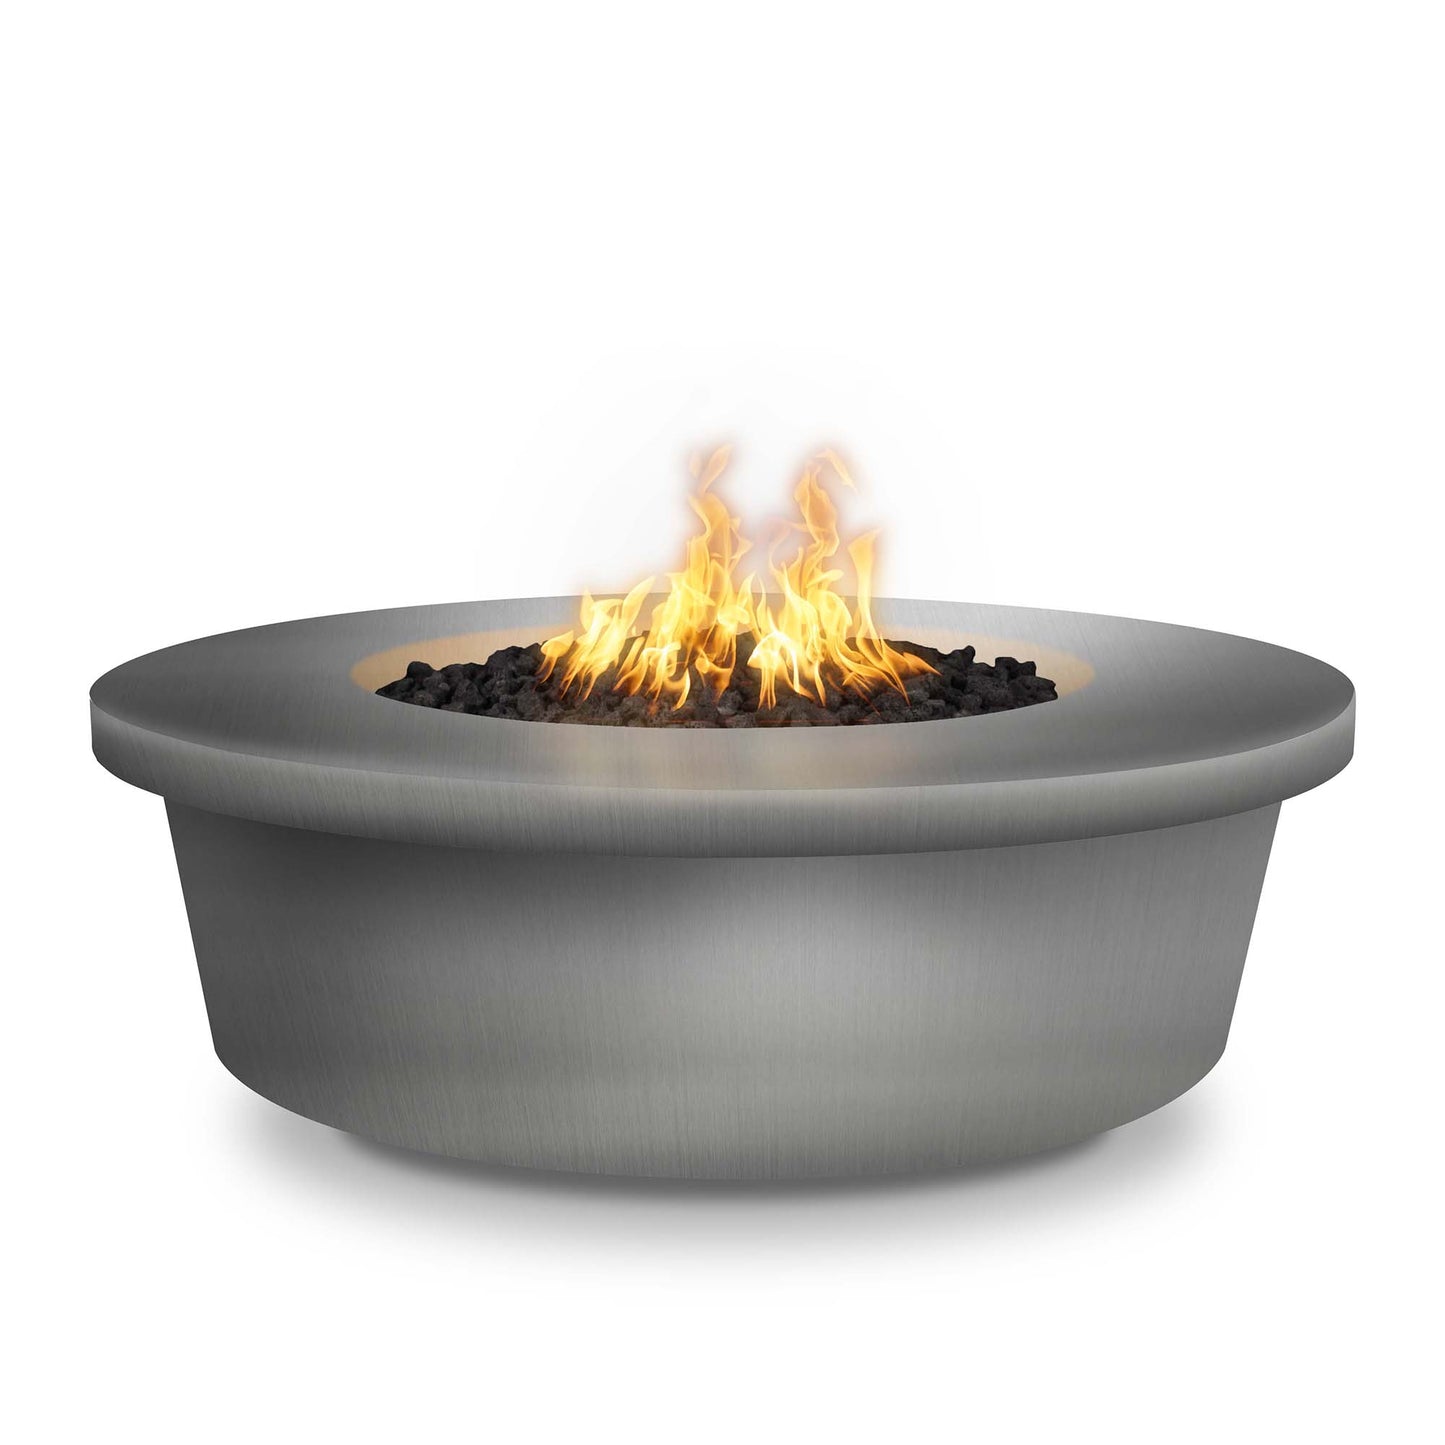 The Outdoor Plus Round Tempe 48" Stainless Steel Natural Gas Fire Pit with Match Lit Ignition